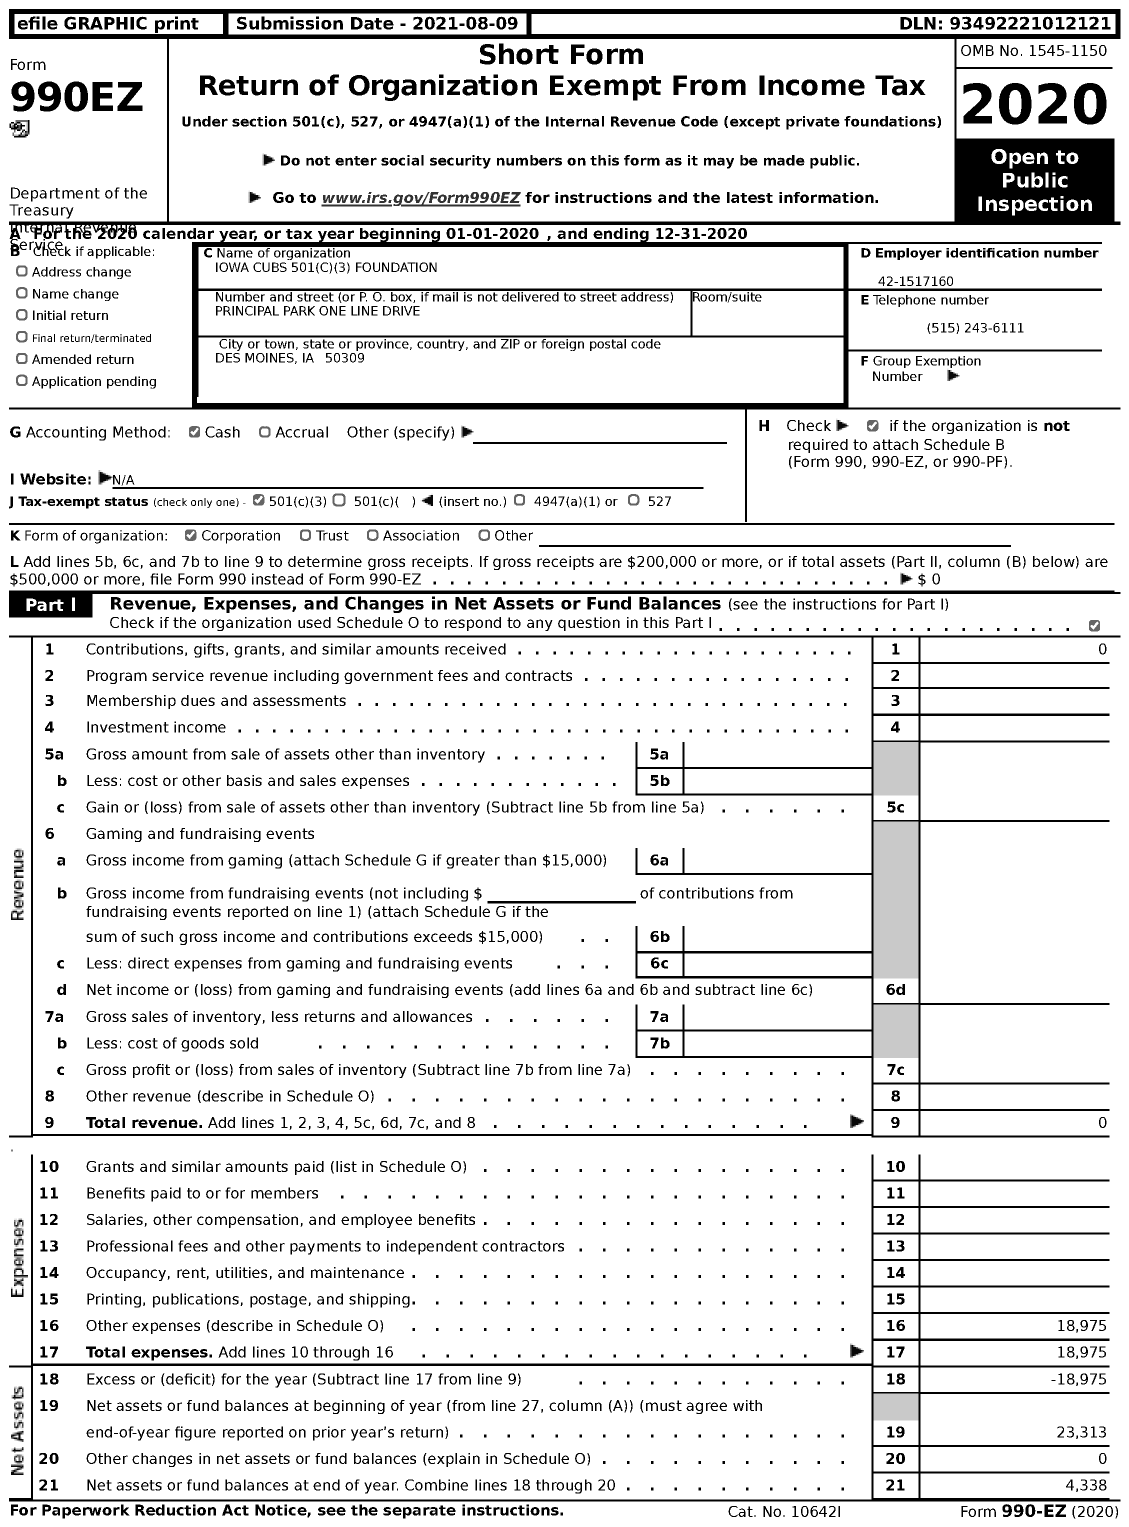 Image of first page of 2020 Form 990EZ for Iowa Cubs 501